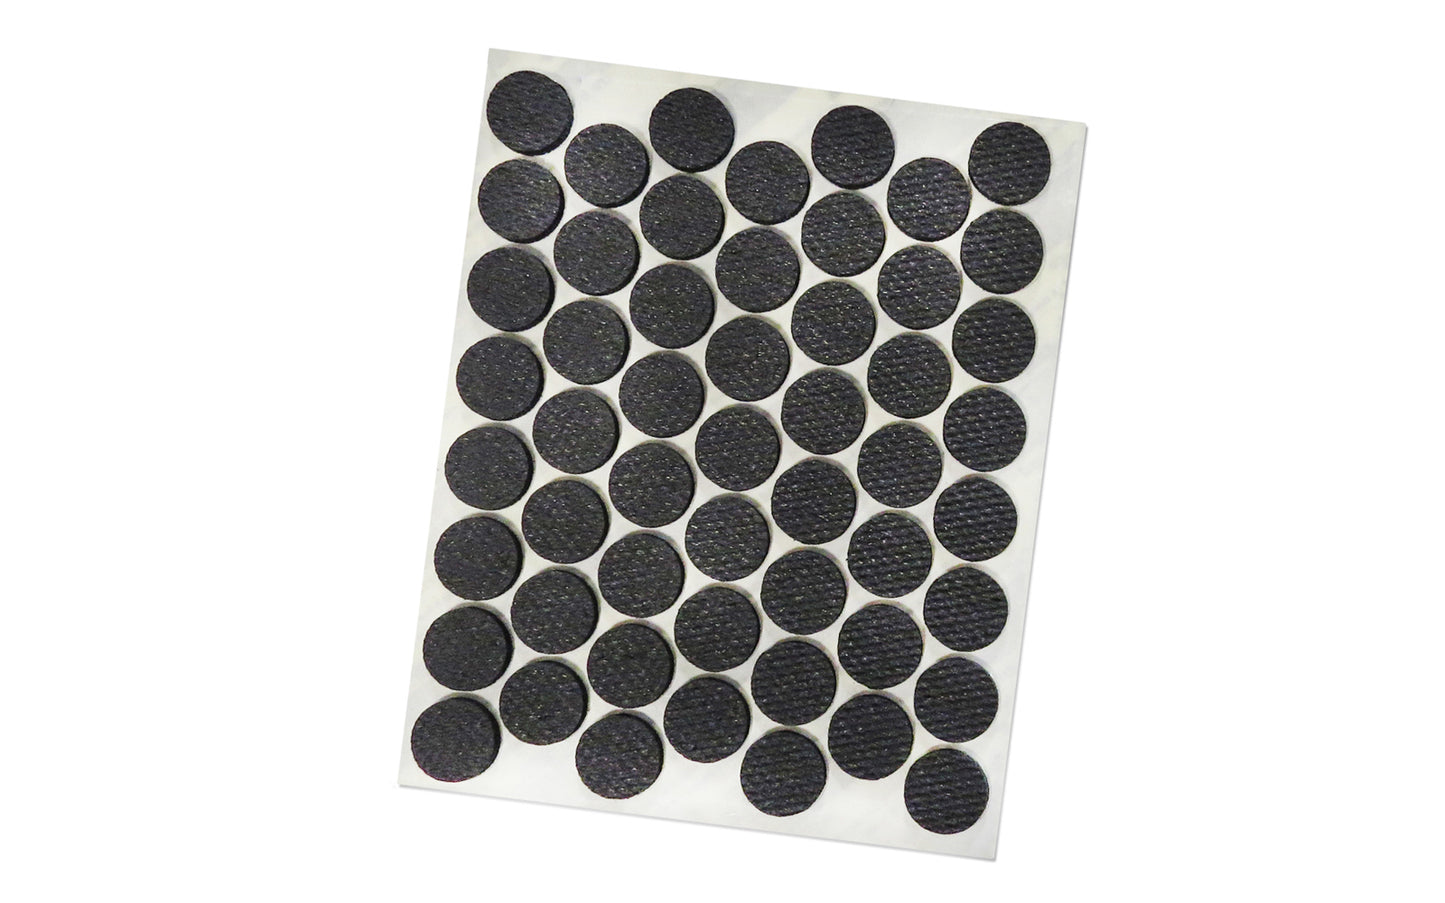 FastCap ~ Anti-skid peel & stick rubber traction dots - 1/2" diameter - 1/8" thick - Flexible rubber has tiny treads on the surface - Helps protect surfaces - Waterproof - can be applied to anything & not damage delicate surfaces. Rubber is flexible with tiny treads on surface for superior grip on smoothest materials - Made in USA